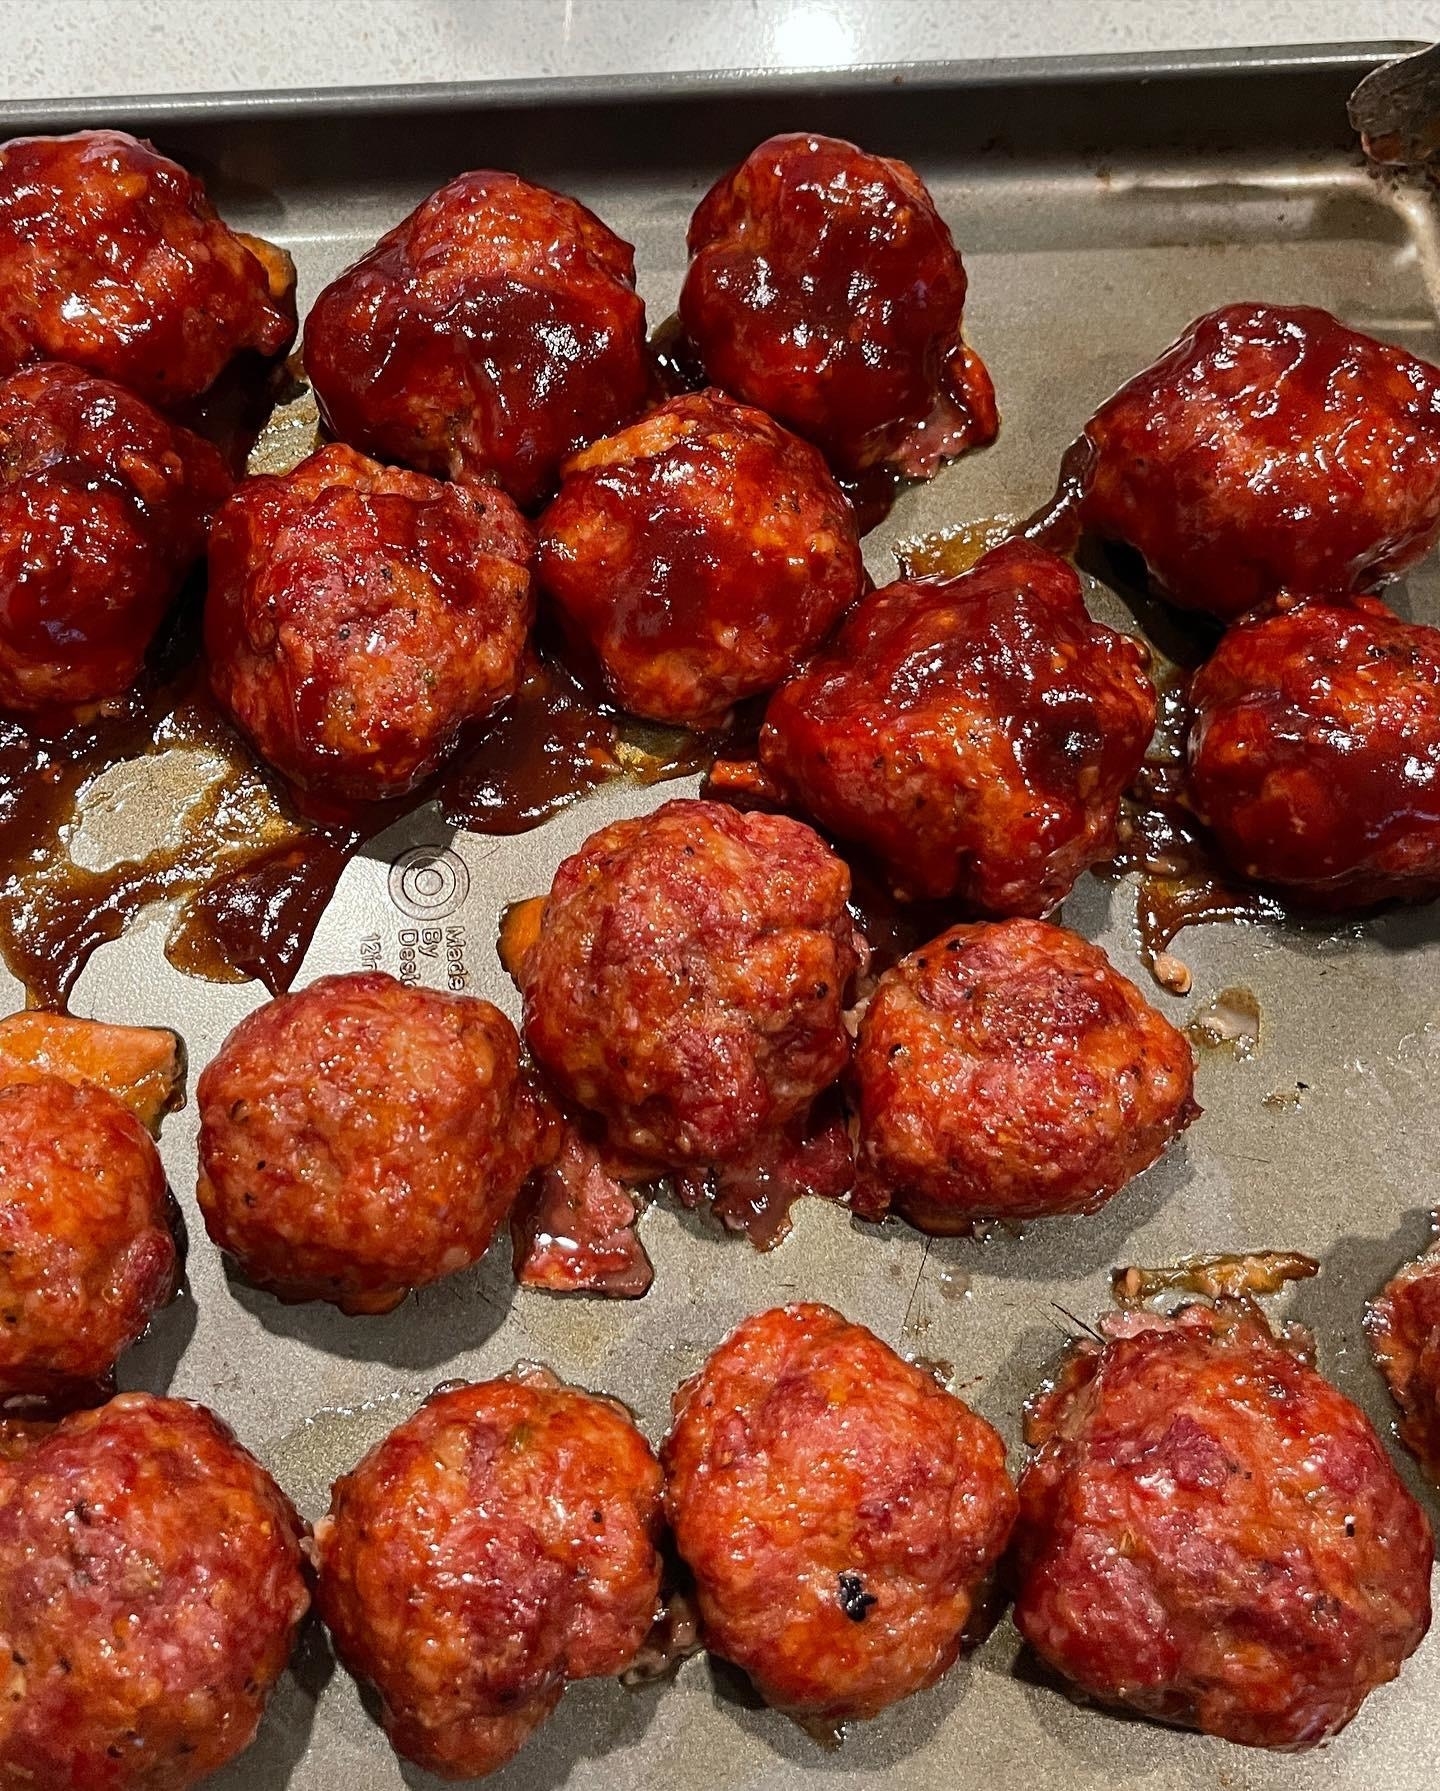 A tray of freshly cooked meatballs with glaze